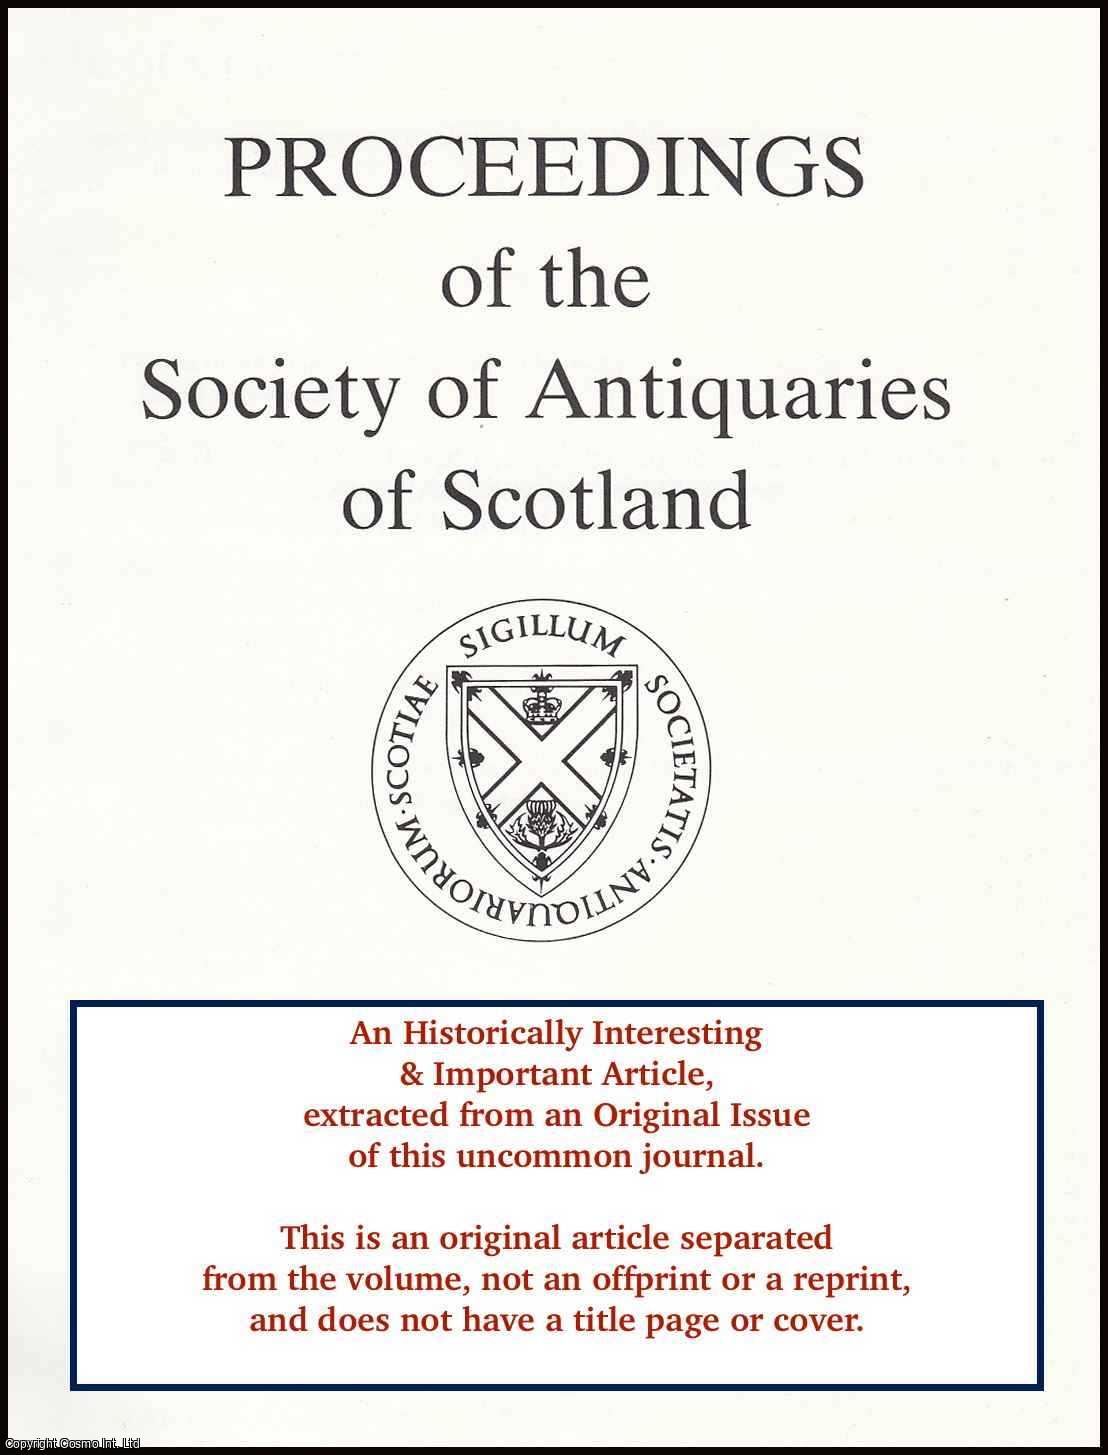 Fraser Hunter - New Light on Iron Age Massive Armlets. An original article from the Proceedings of the Society of Antiquaries of Scotland, 2006.